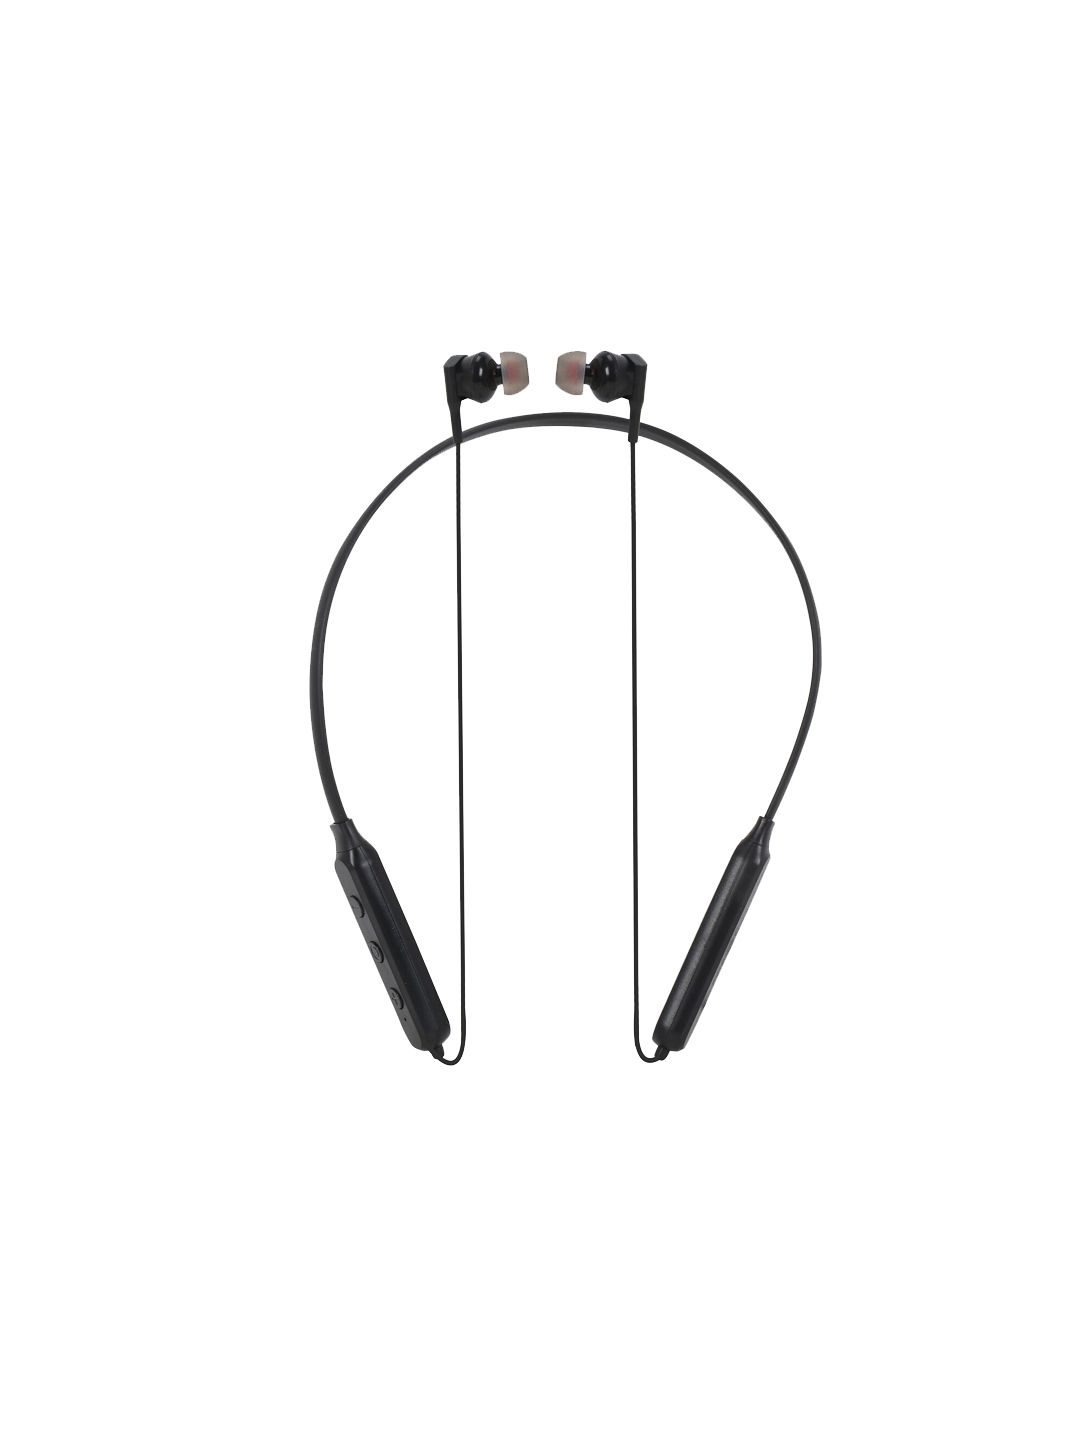 SWAGME Black Dual Tone Wireless Neckband Earphone with Bluetooth Price in India